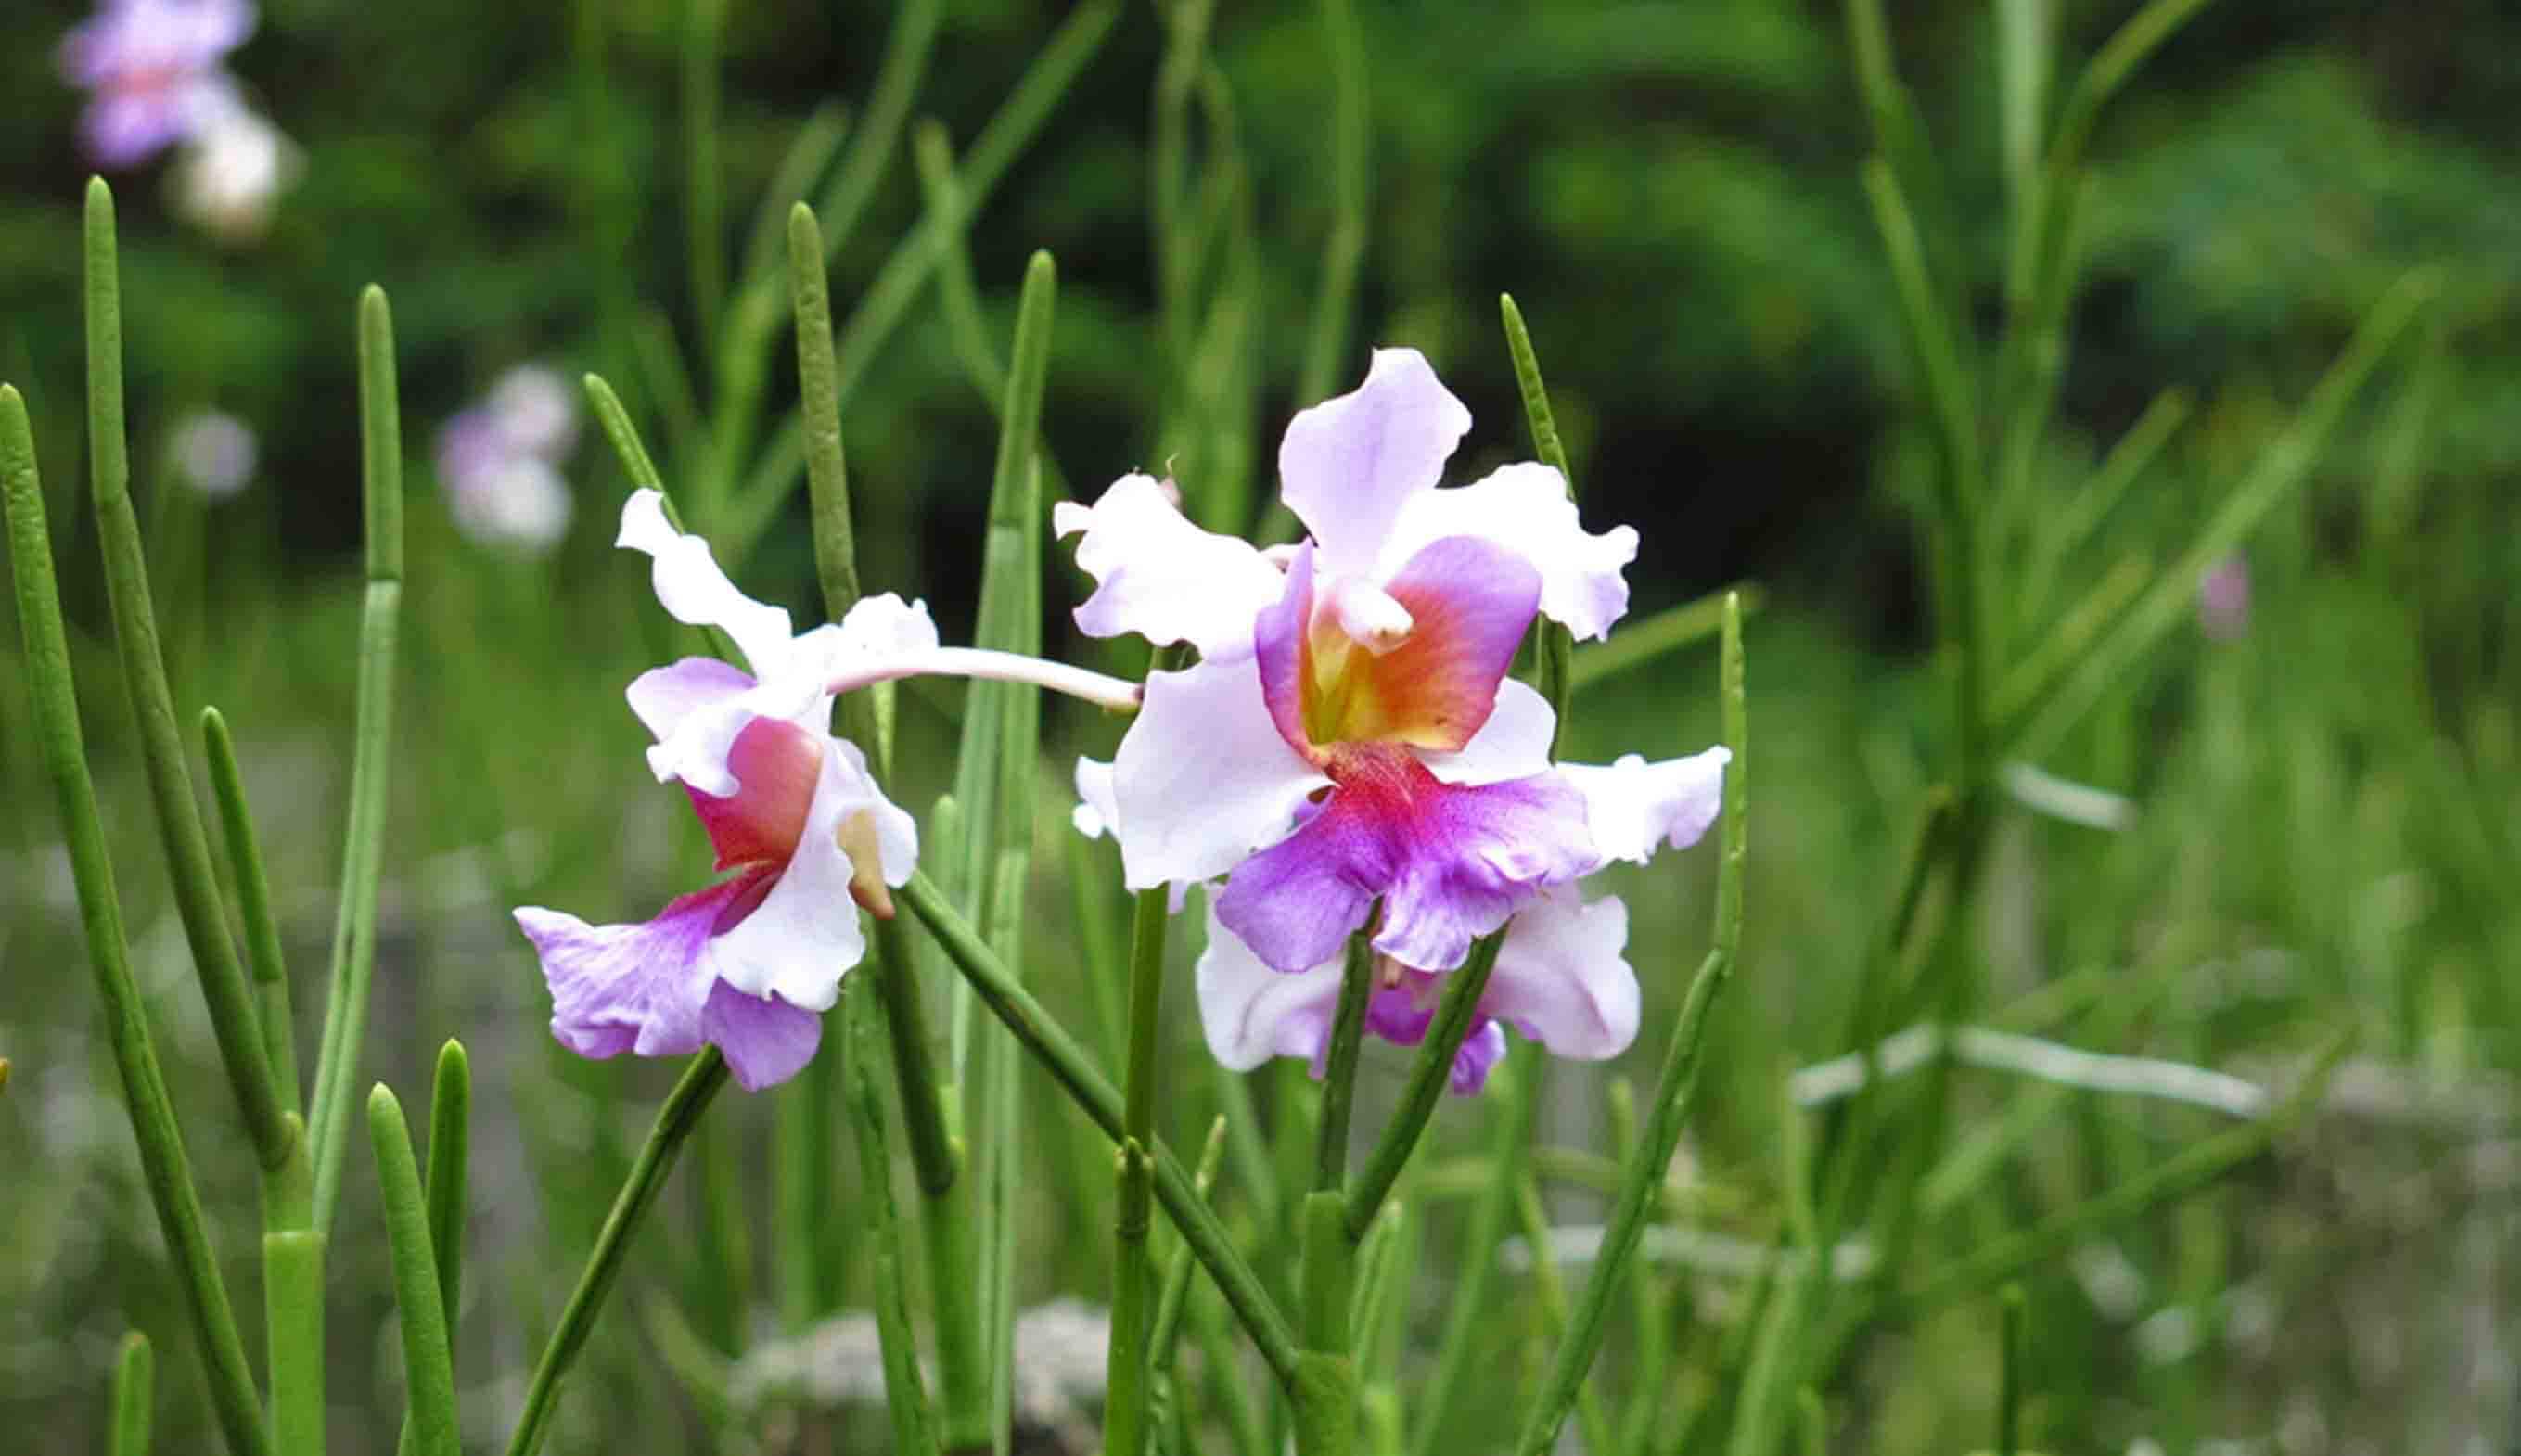 Singapore's National Flower The Hybrid Orchid